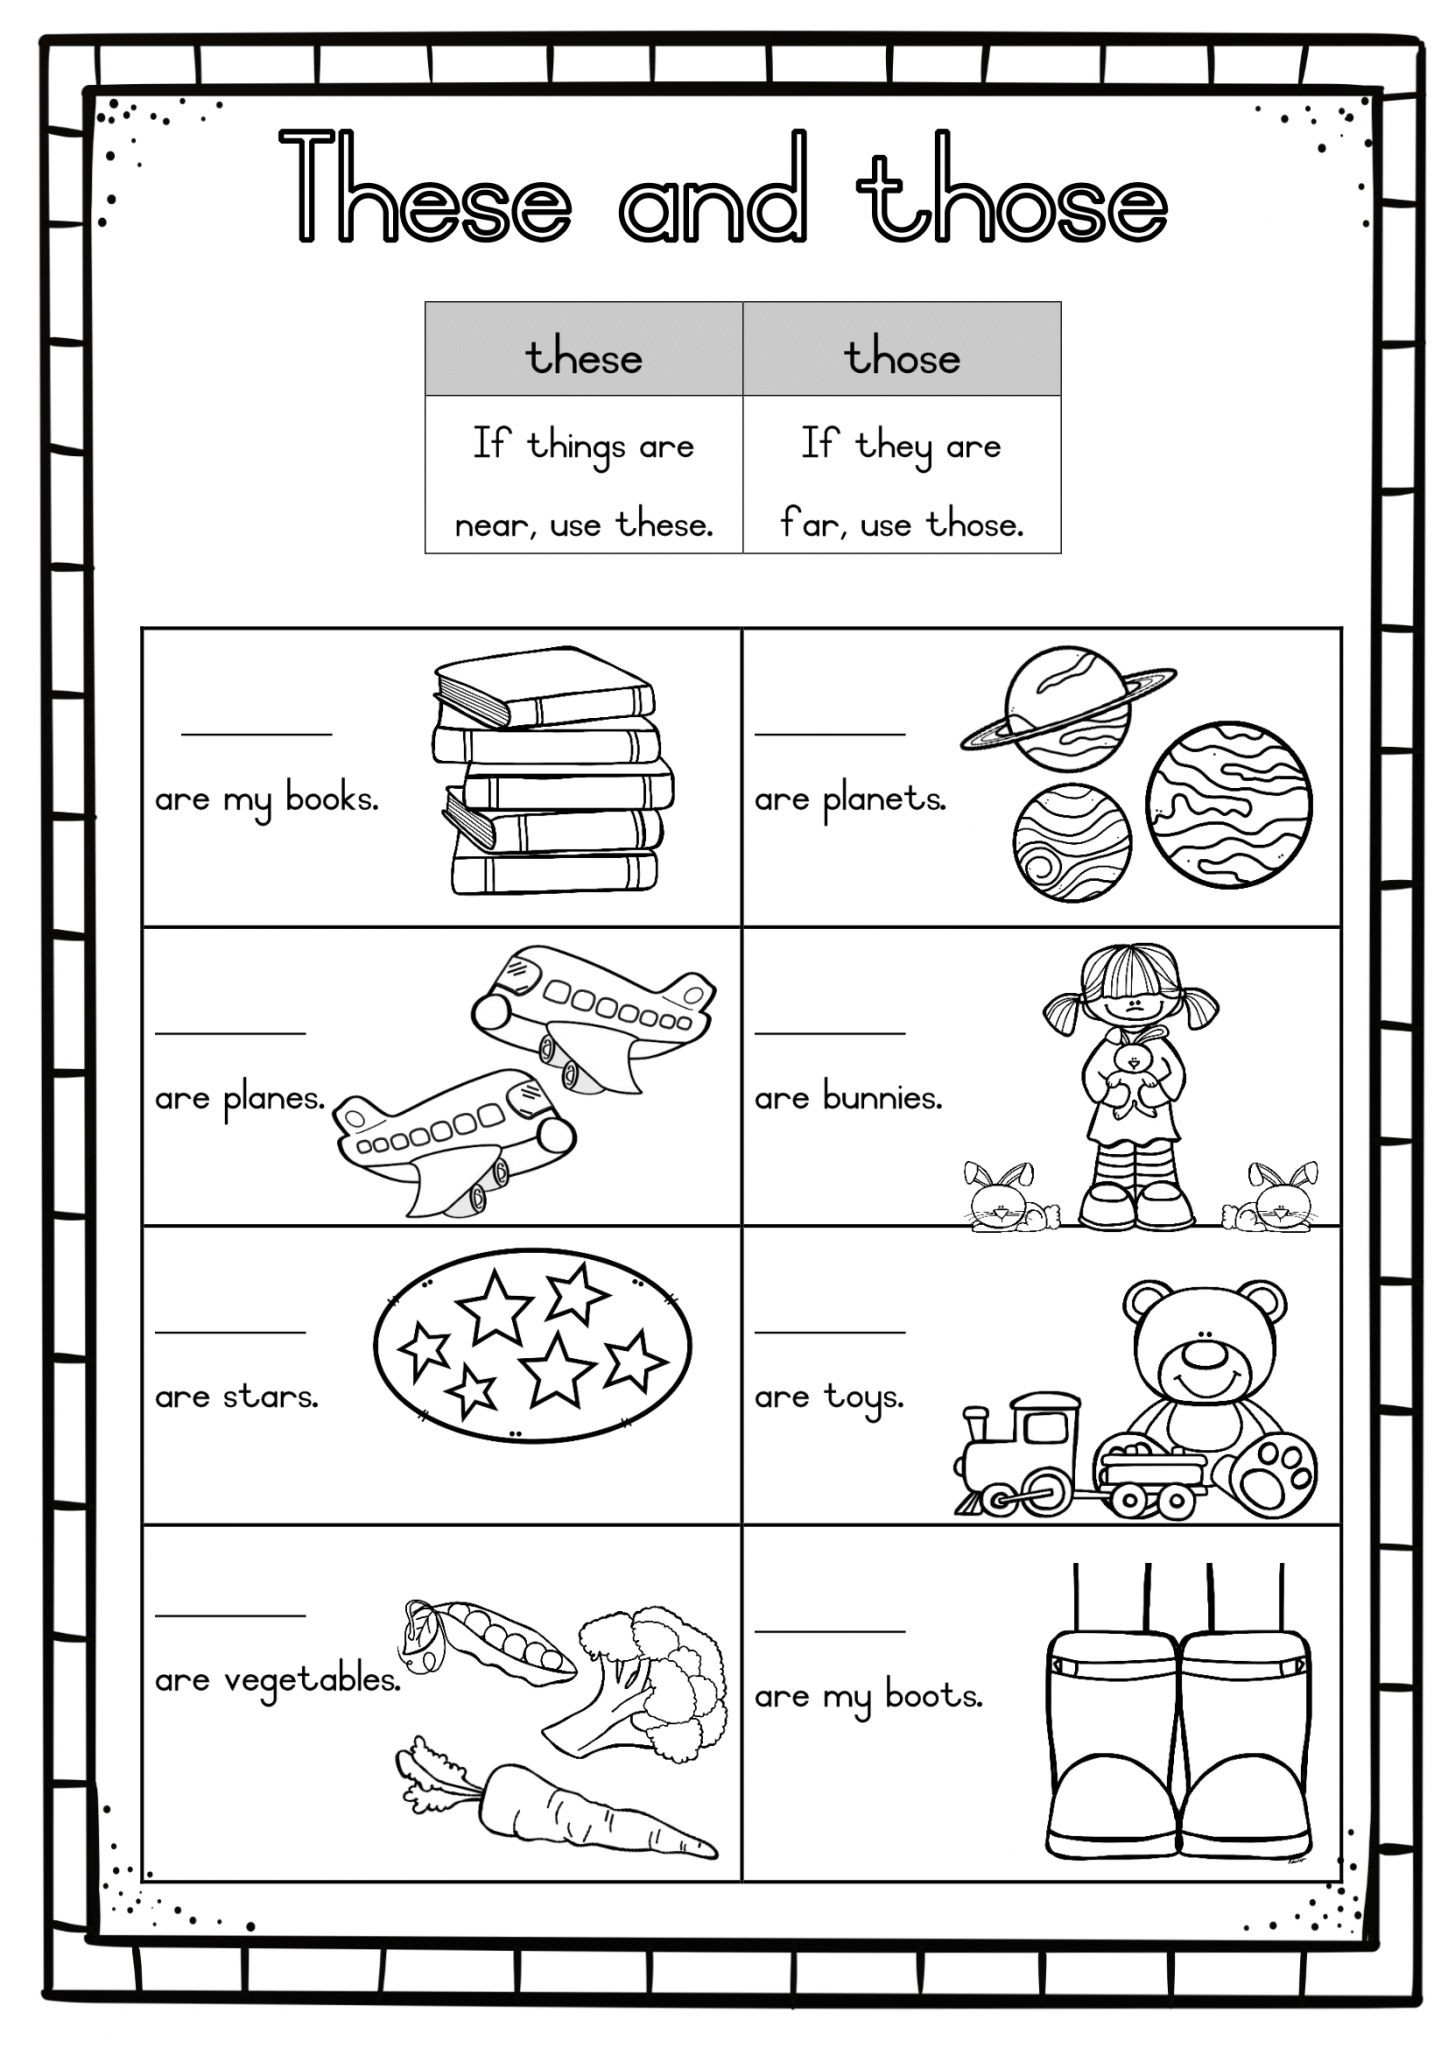 English Worksheets For Grade 1 British Curriculum